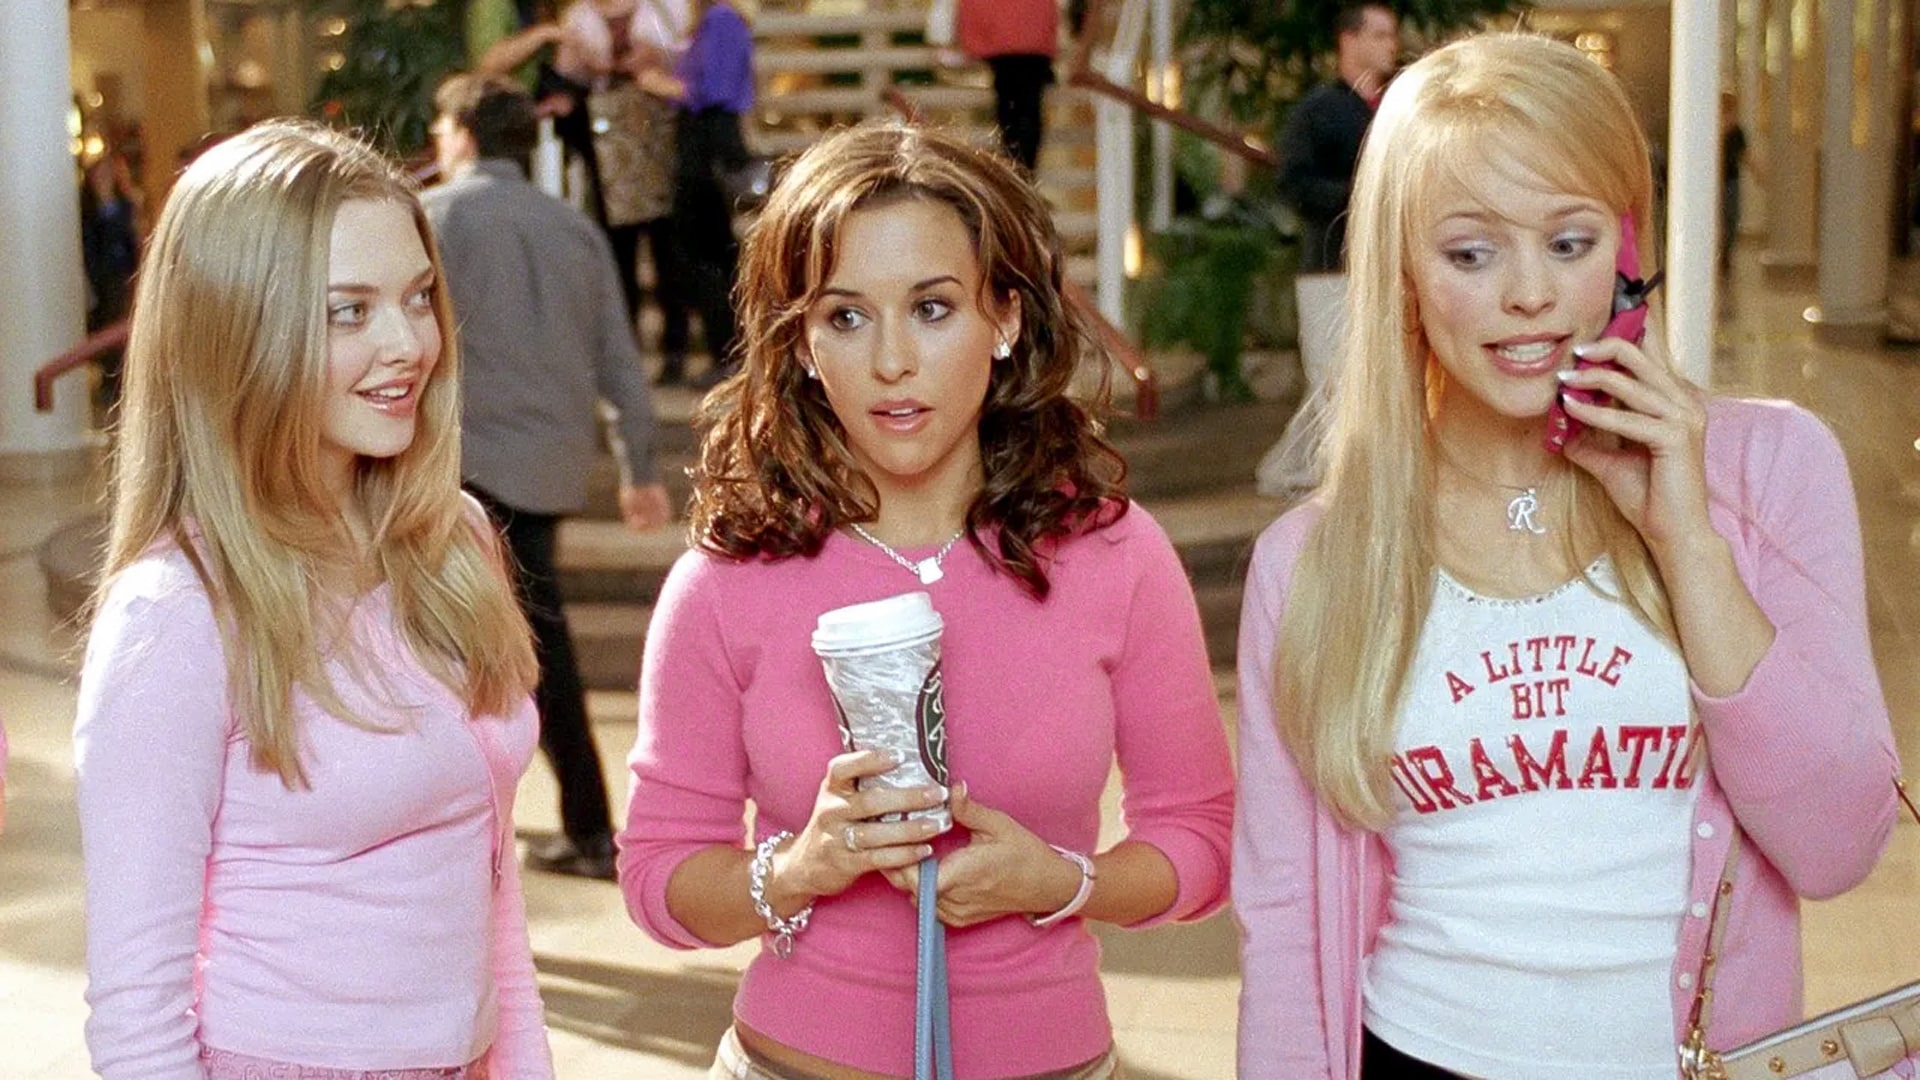 Gretchen Wieners totally fetch outfits in 'Mean Girls', 2004